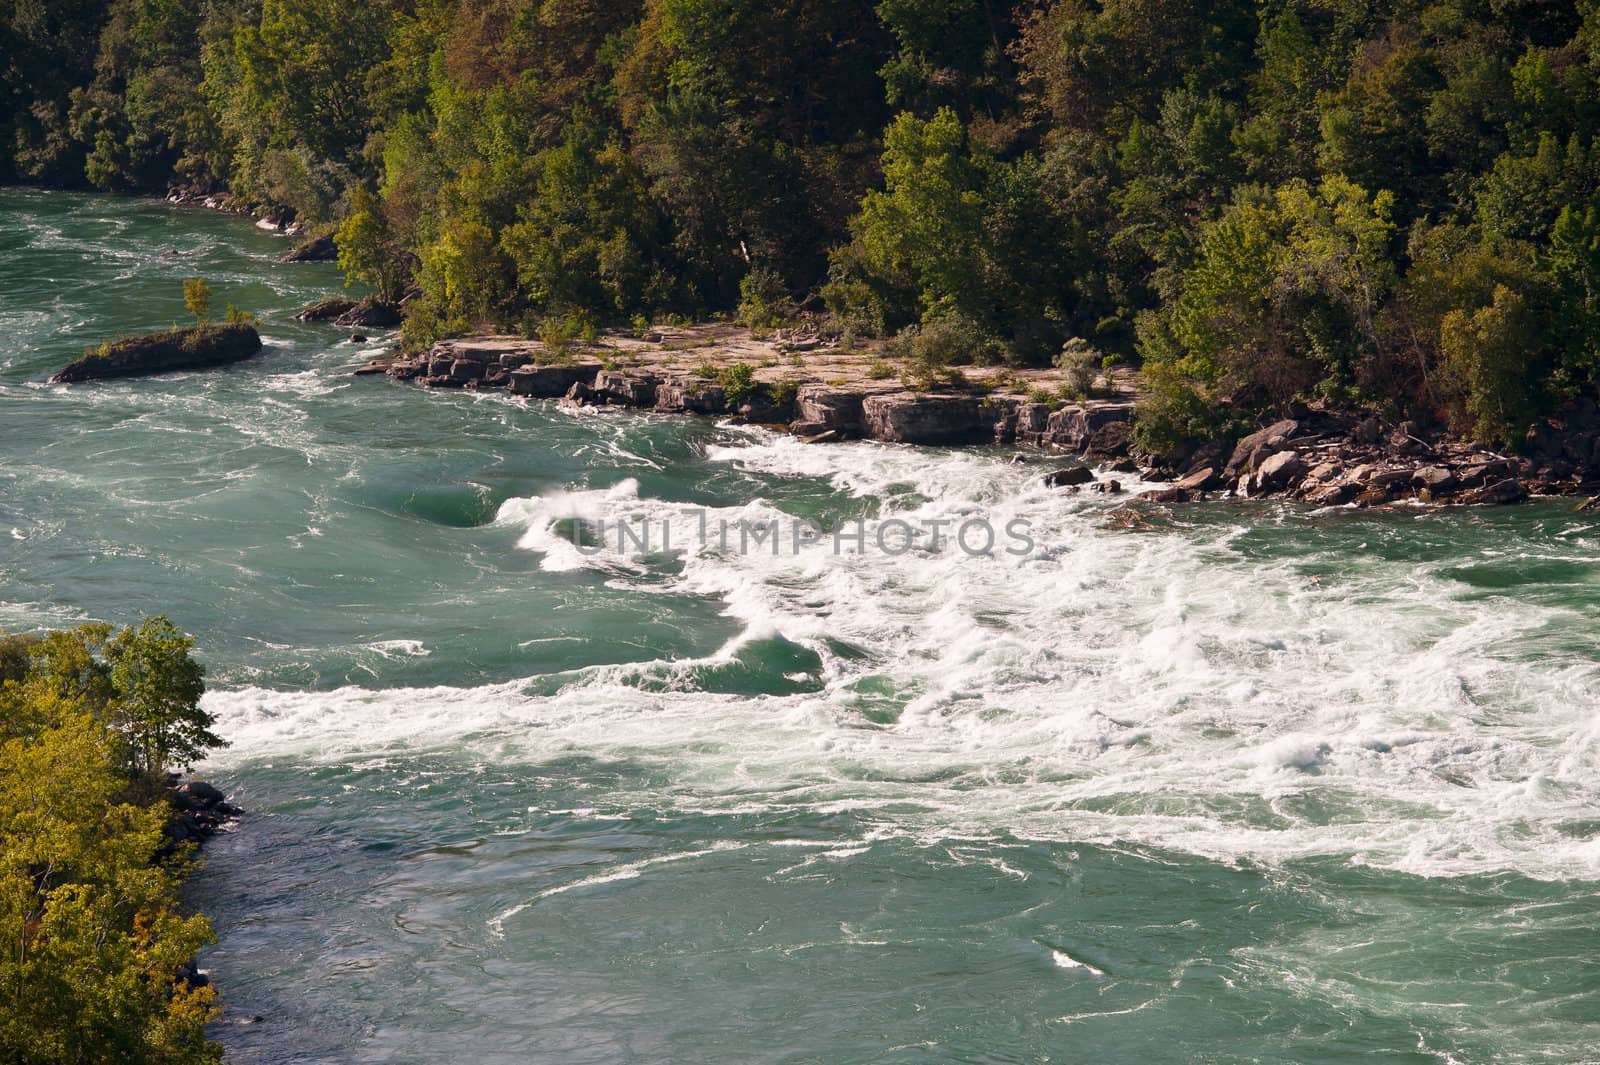 Rapids on the Niagara River, some of the most dangerous down from Niagara Falls